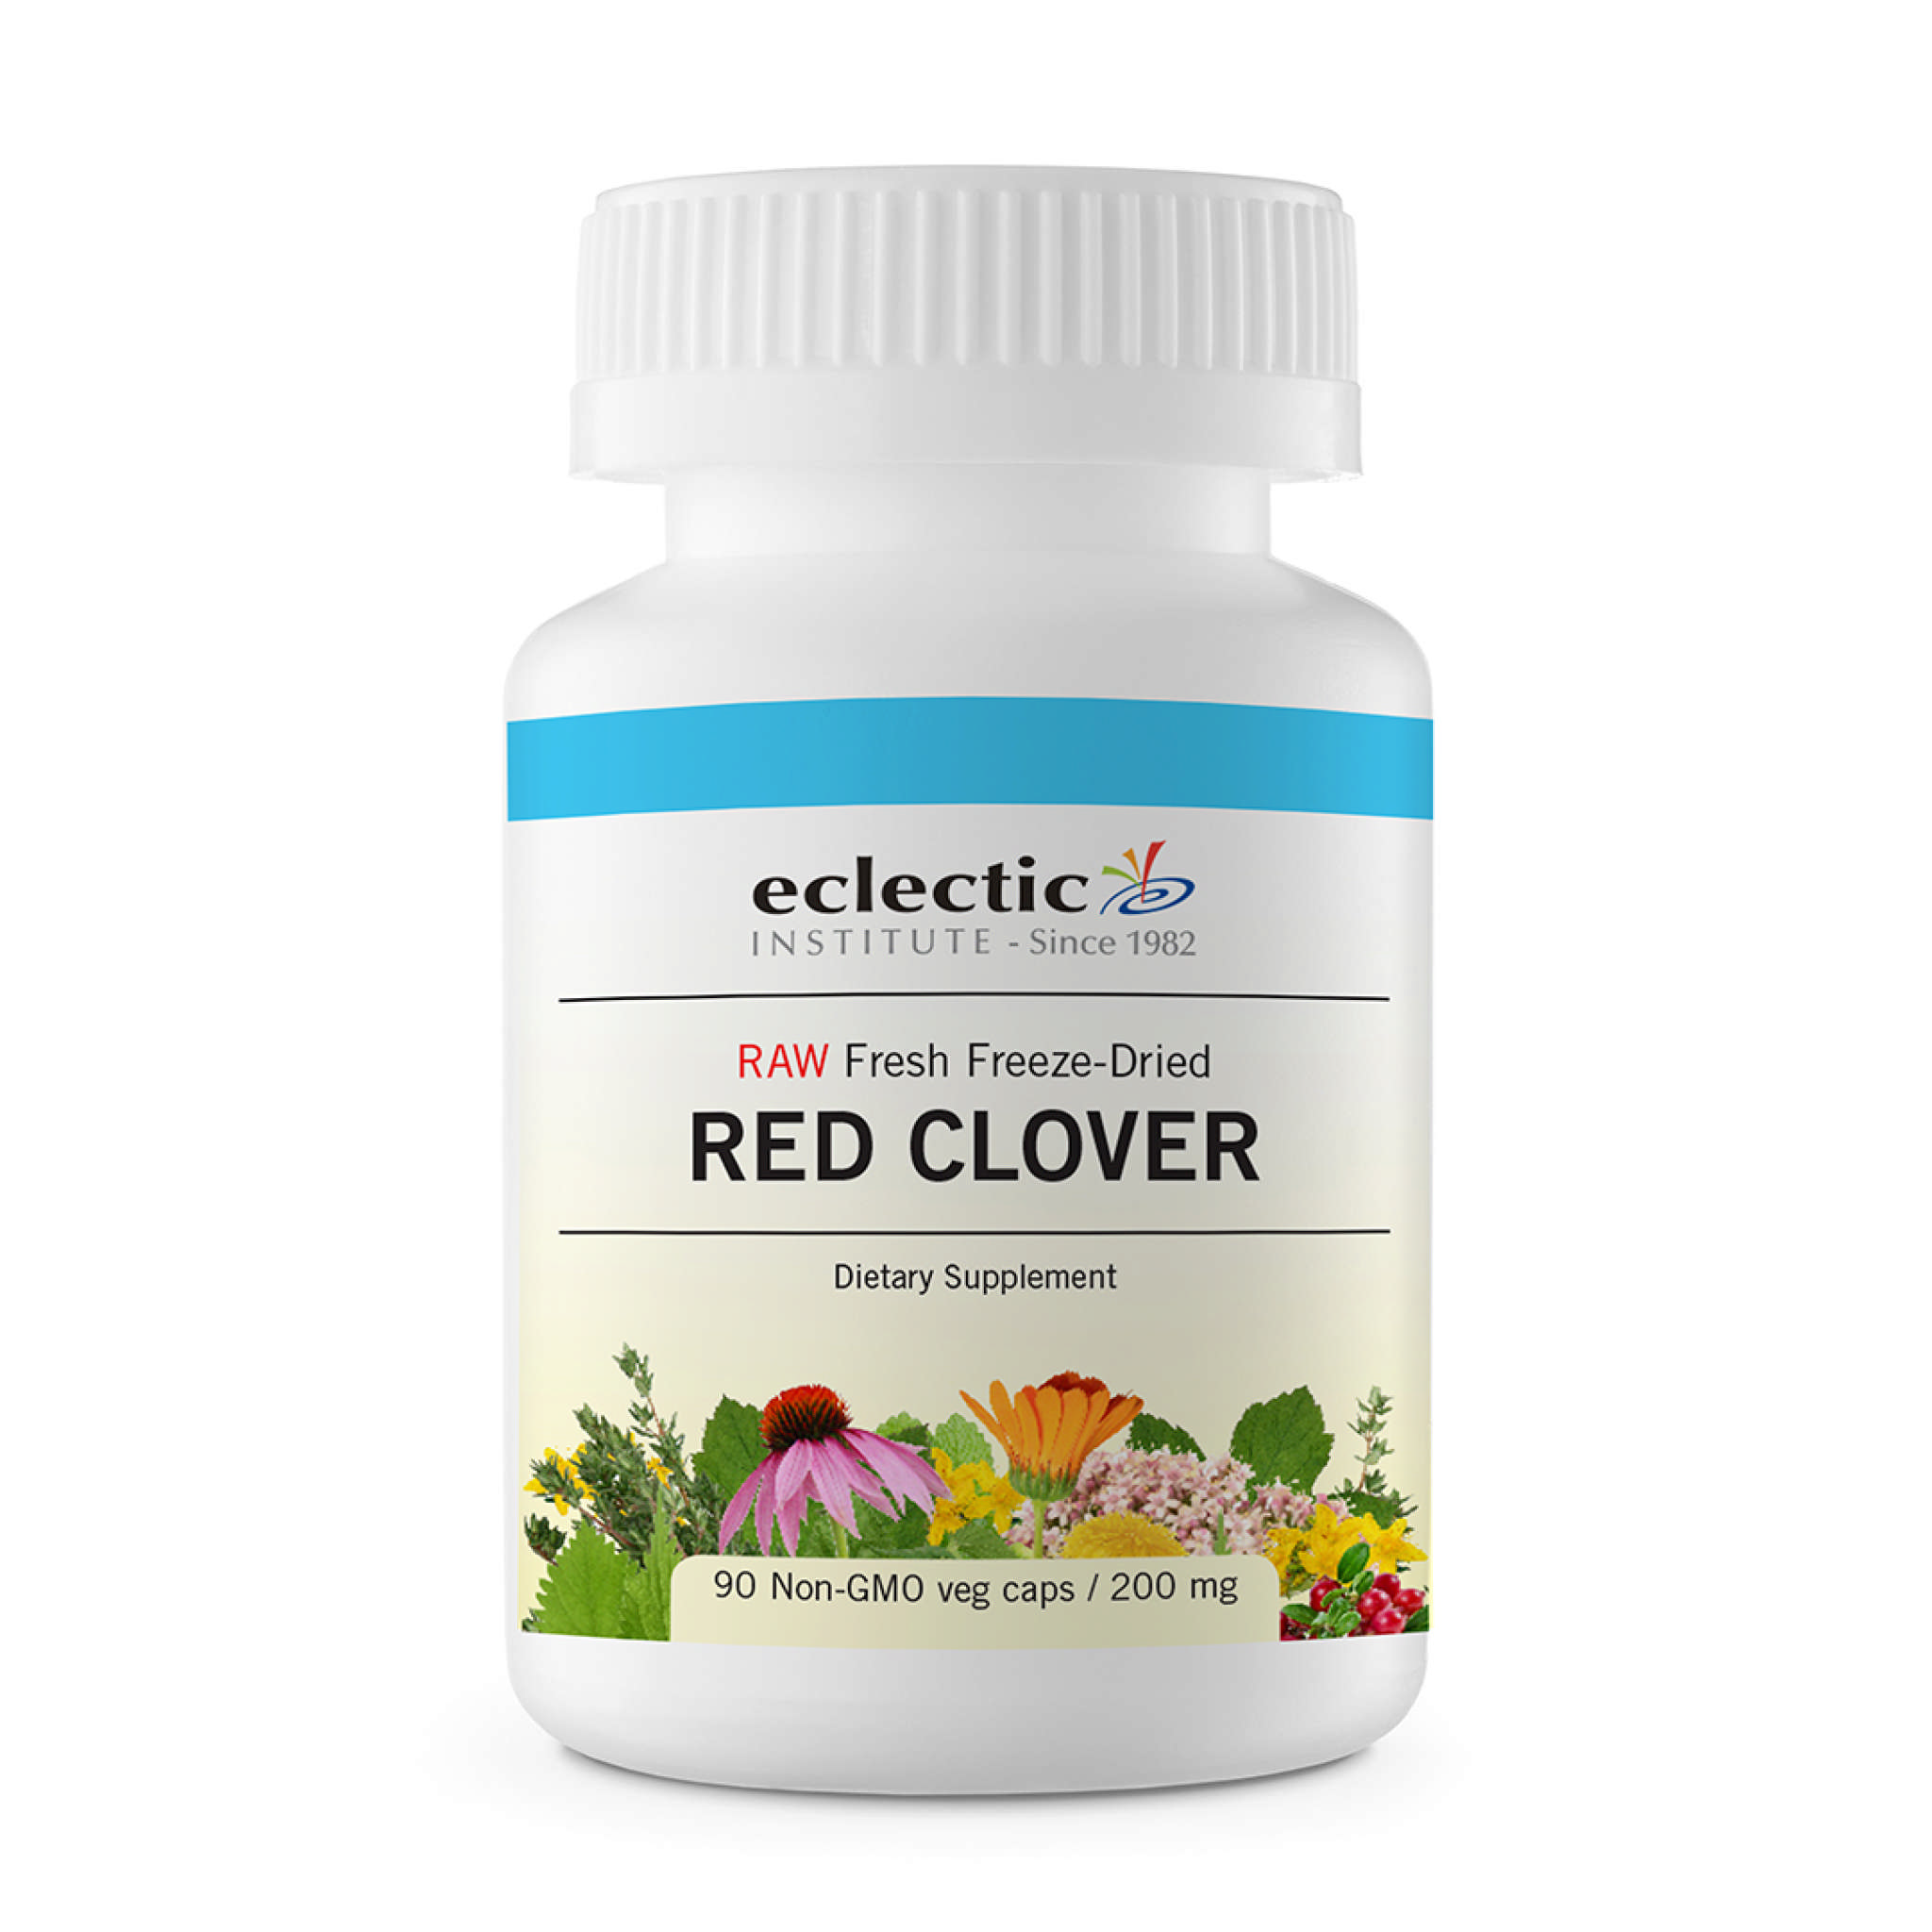 Eclectic Institute - Red Clover vCap